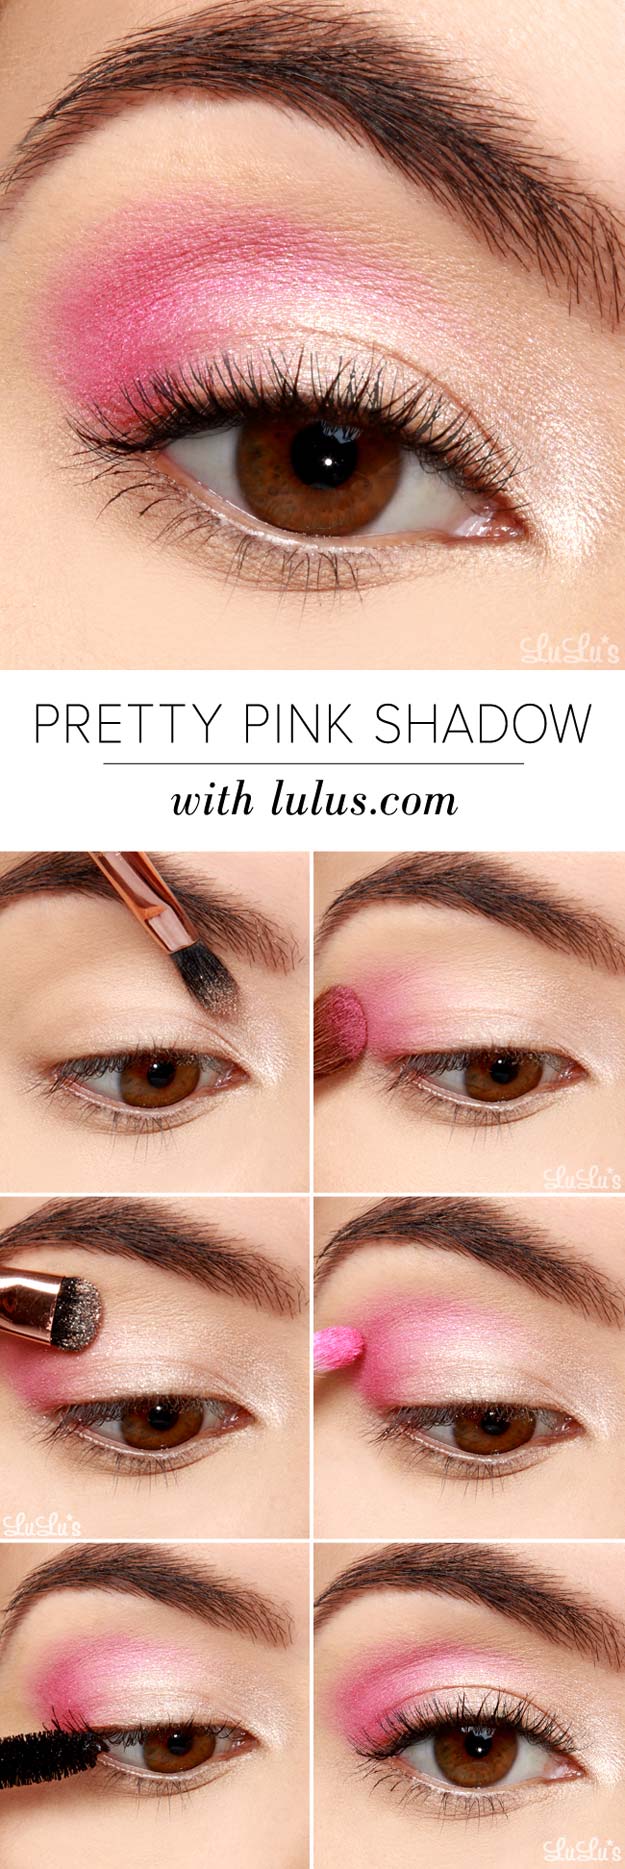 Best Eyeshadow Tutorials - Pretty Pink Eyeshadow Tutorial - Easy Step by Step How To For Eye Shadow - Cool Makeup Tricks and Eye Makeup Tutorial With Instructions - Quick Ways to Do Smoky Eye, Natural Makeup, Looks for Day and Evening, Brown and Blue Eyes - Cool Ideas for Beginners and Teens 